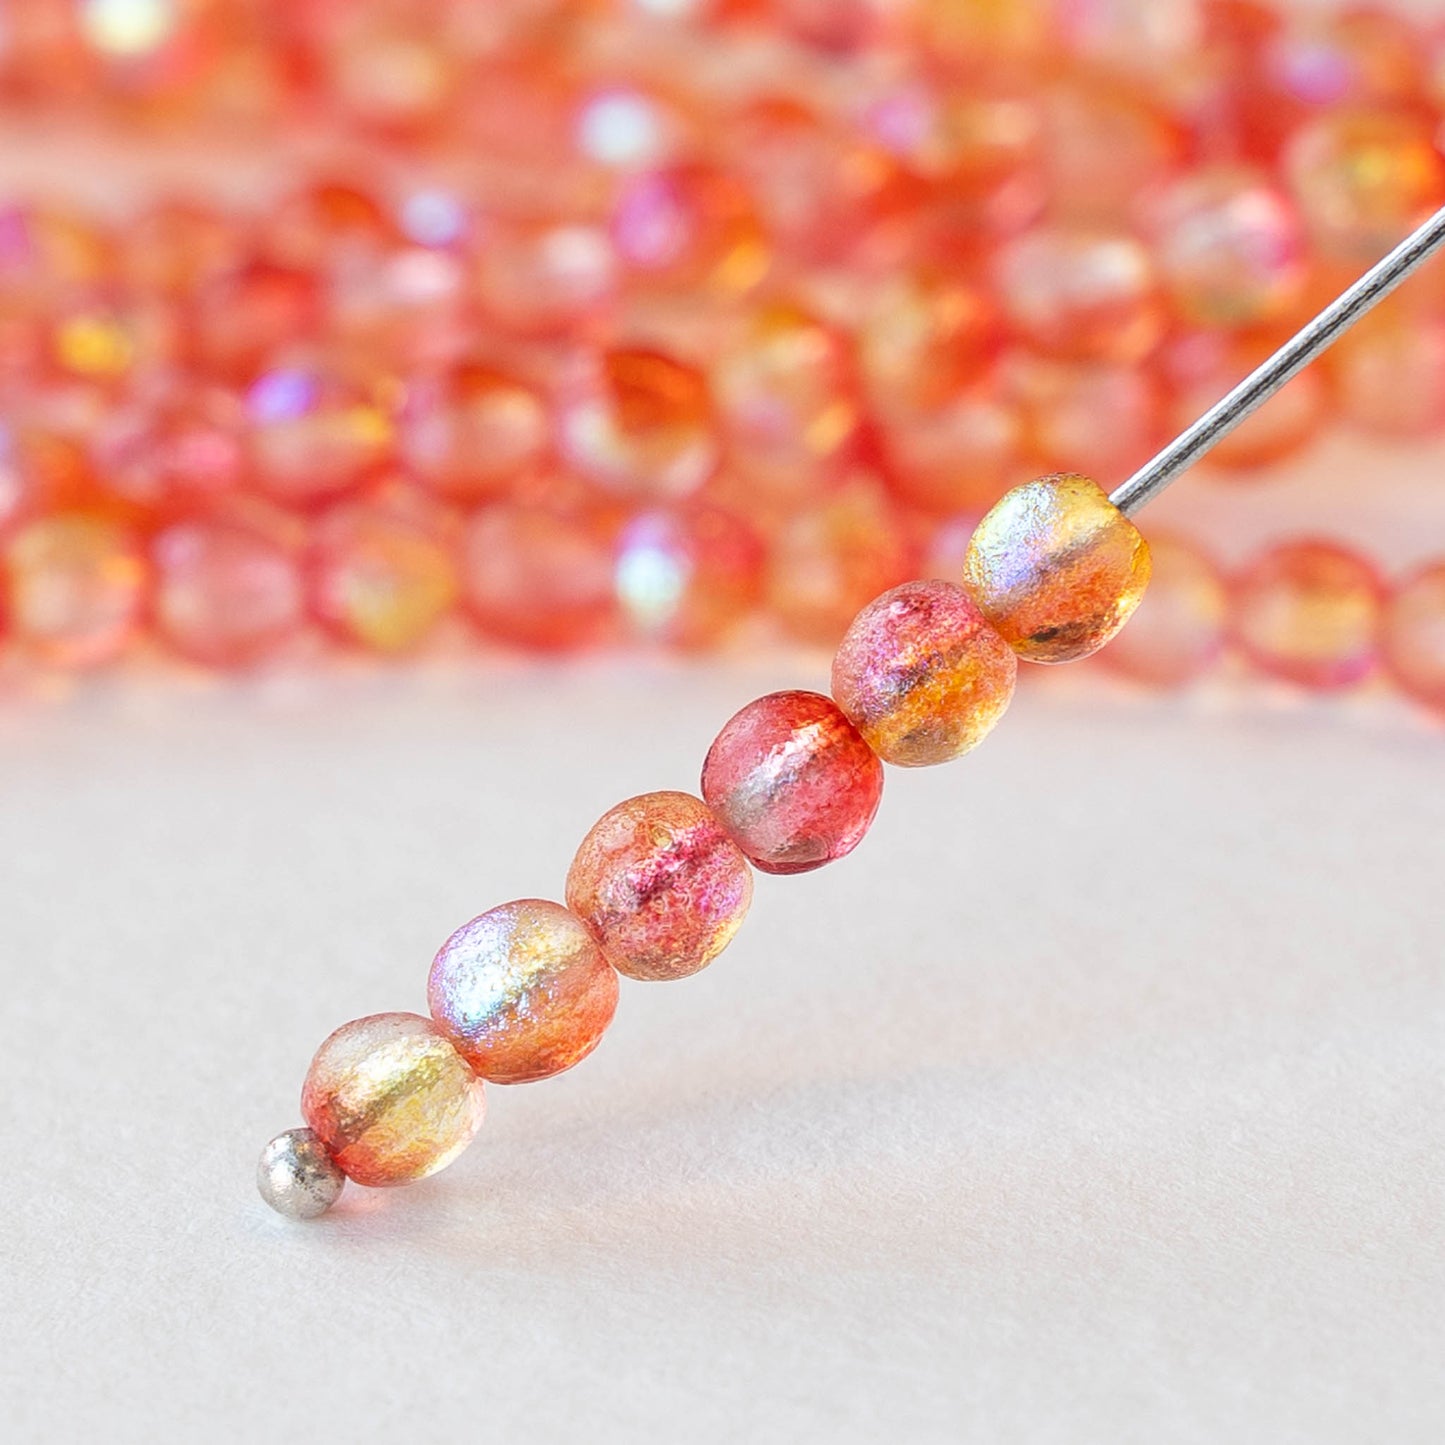 4mm Round Beads Beads - Etched Orange - 50 Beads